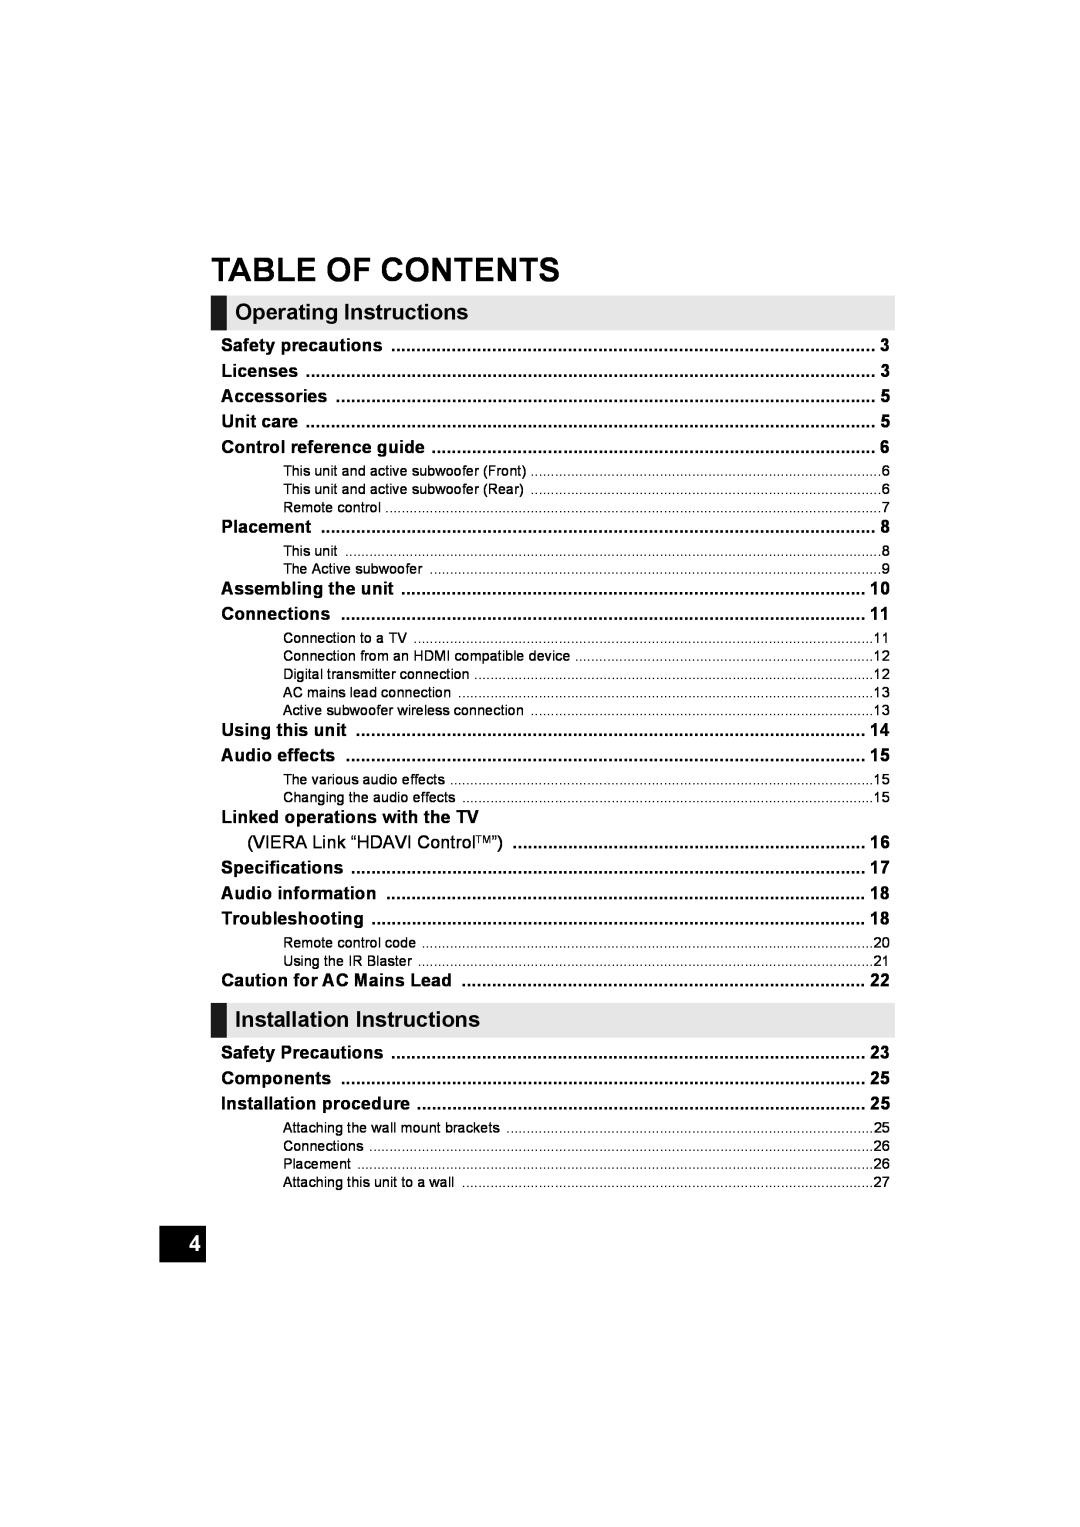 Panasonic SC-HTB500 Table Of Contents, Operating Instructions, Installation Instructions, Linked operations with the TV 